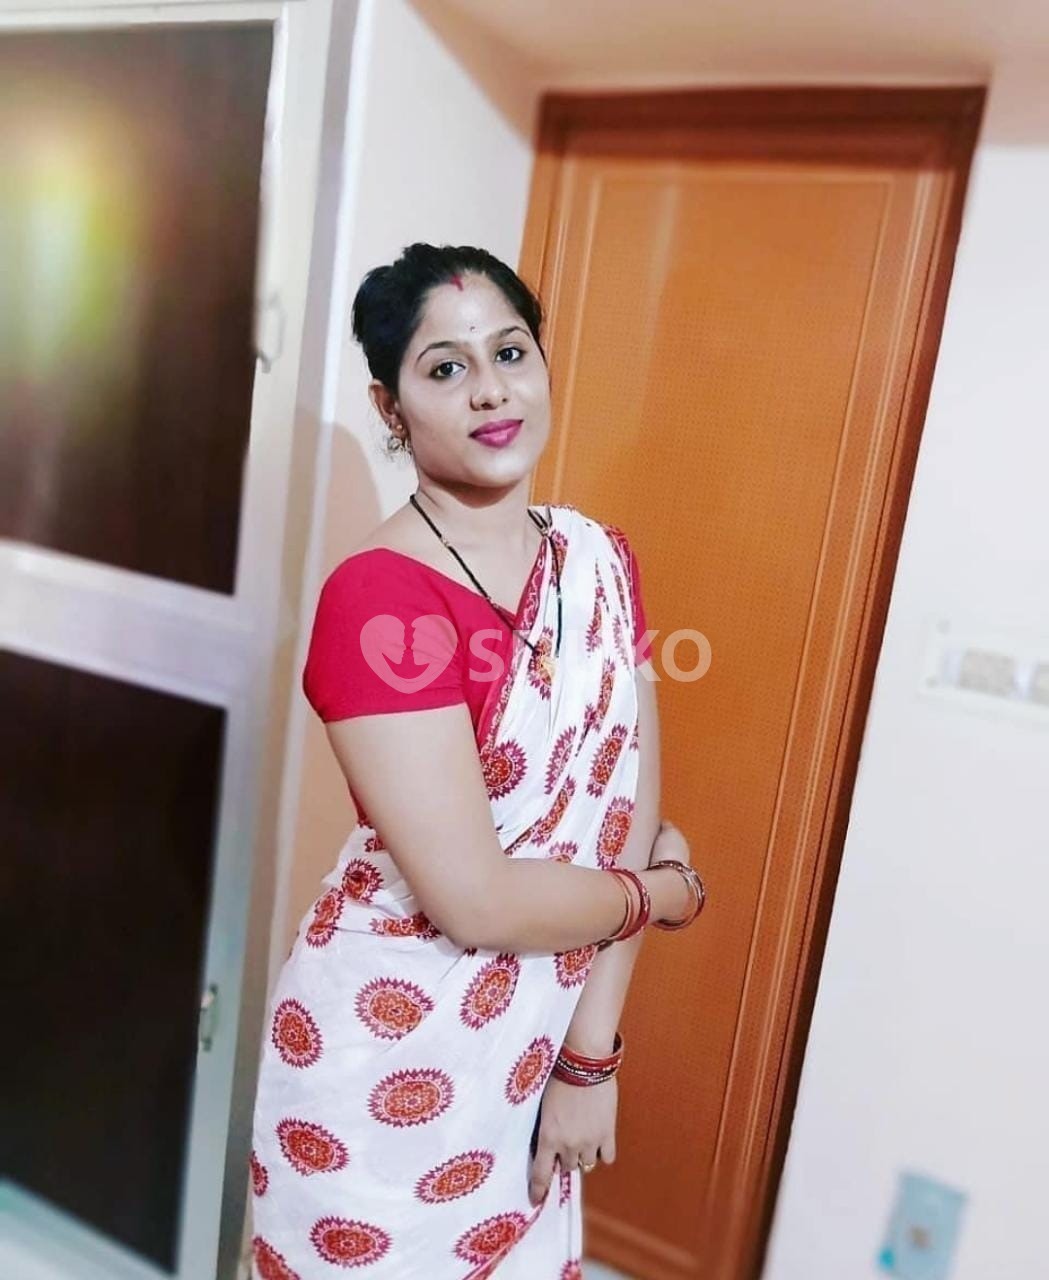 Begumpet.LOW PRICE VIP CALL-GIRL SERVICE DOORSTEP AND INCALL AVAILABLE